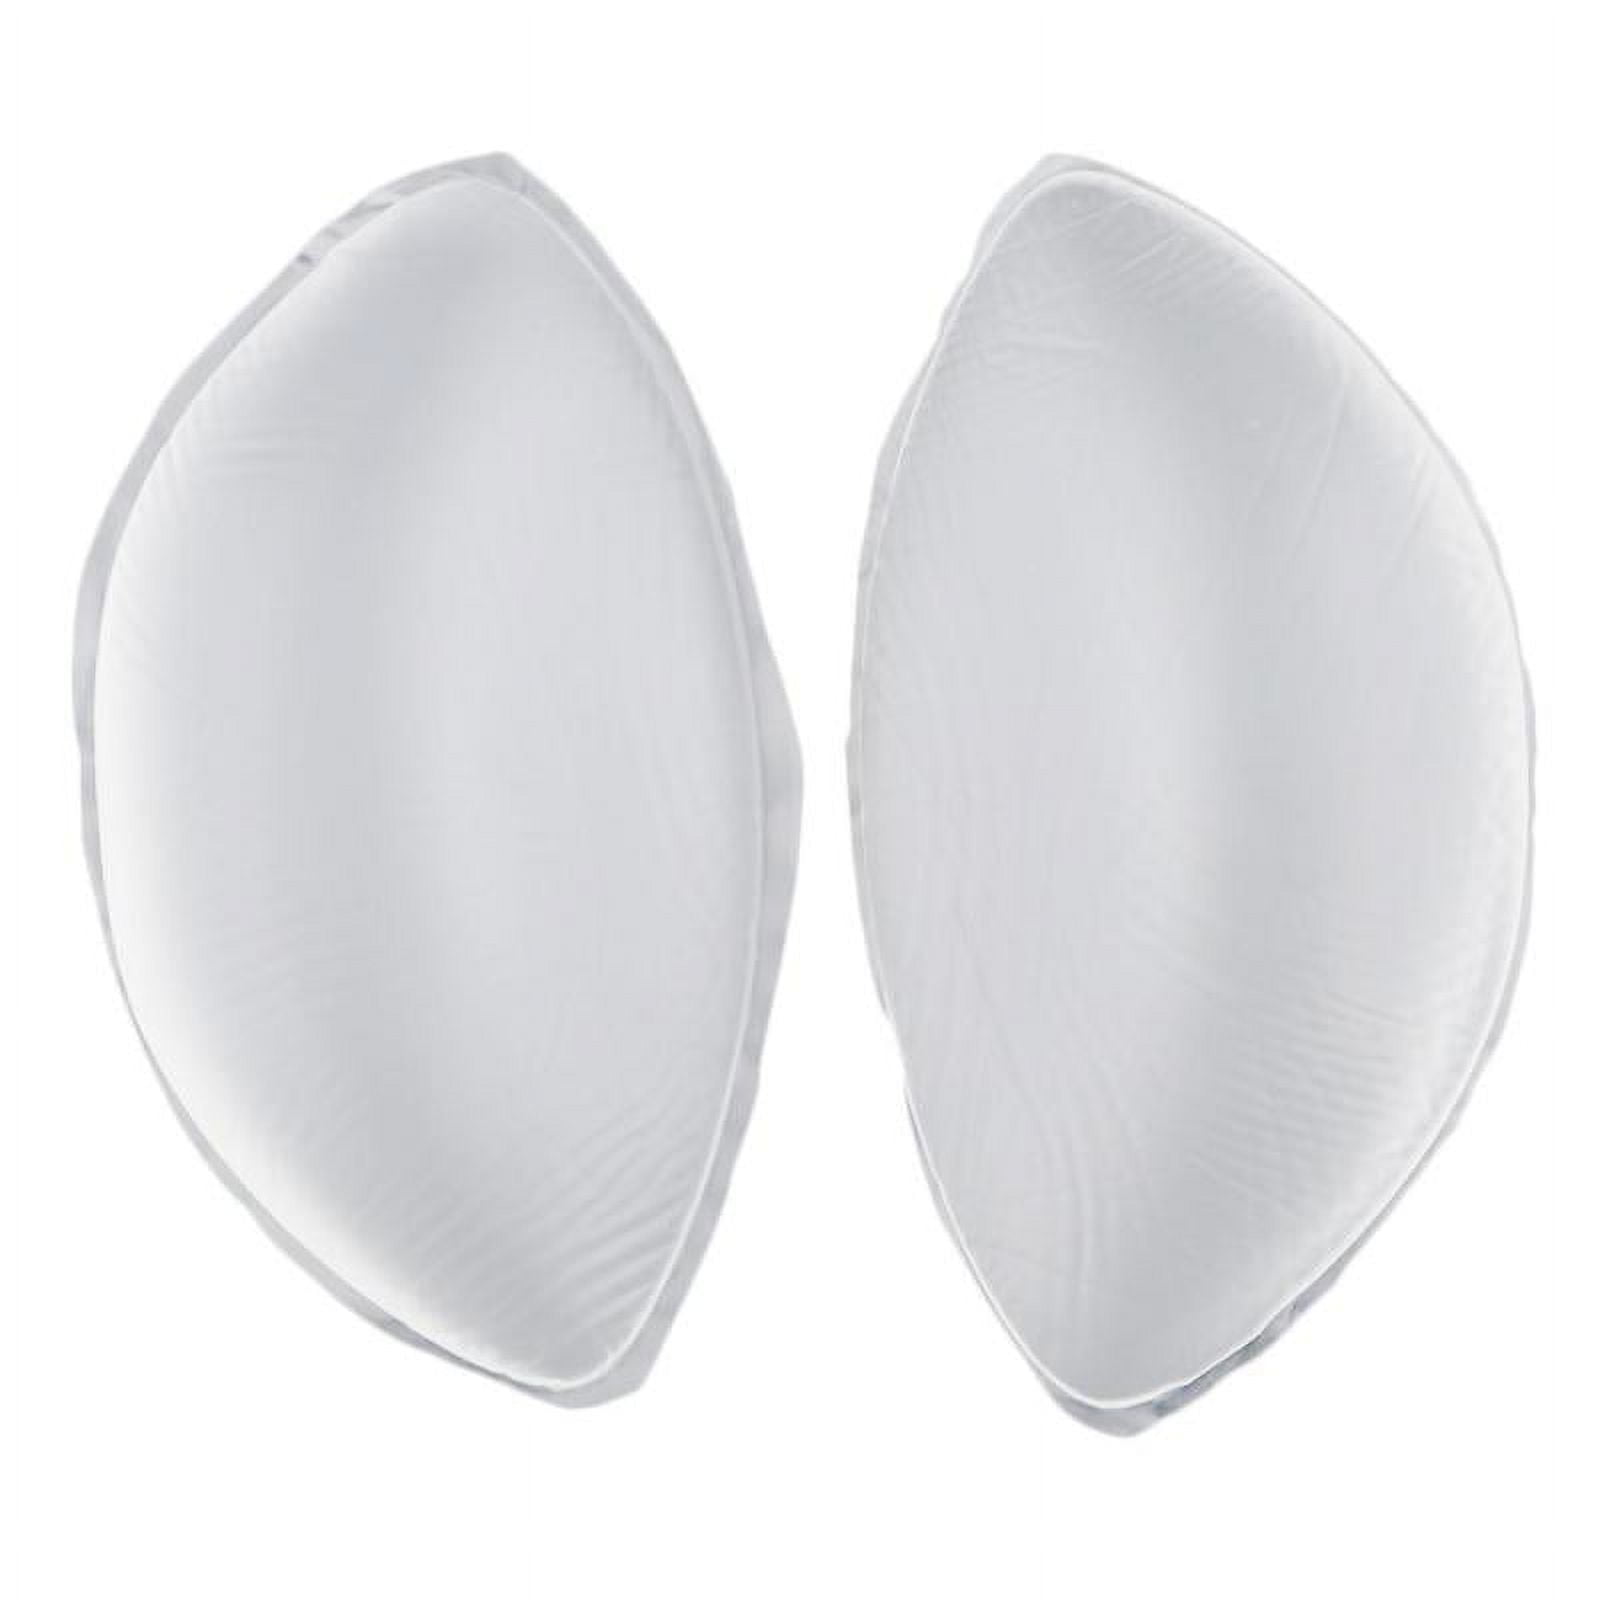 Silicone Breastplates Huge SZ Cup Breast Forms, Drag Queen Touch Soft Fake  Boobs Enhancer for Transgender Cosplay Tits